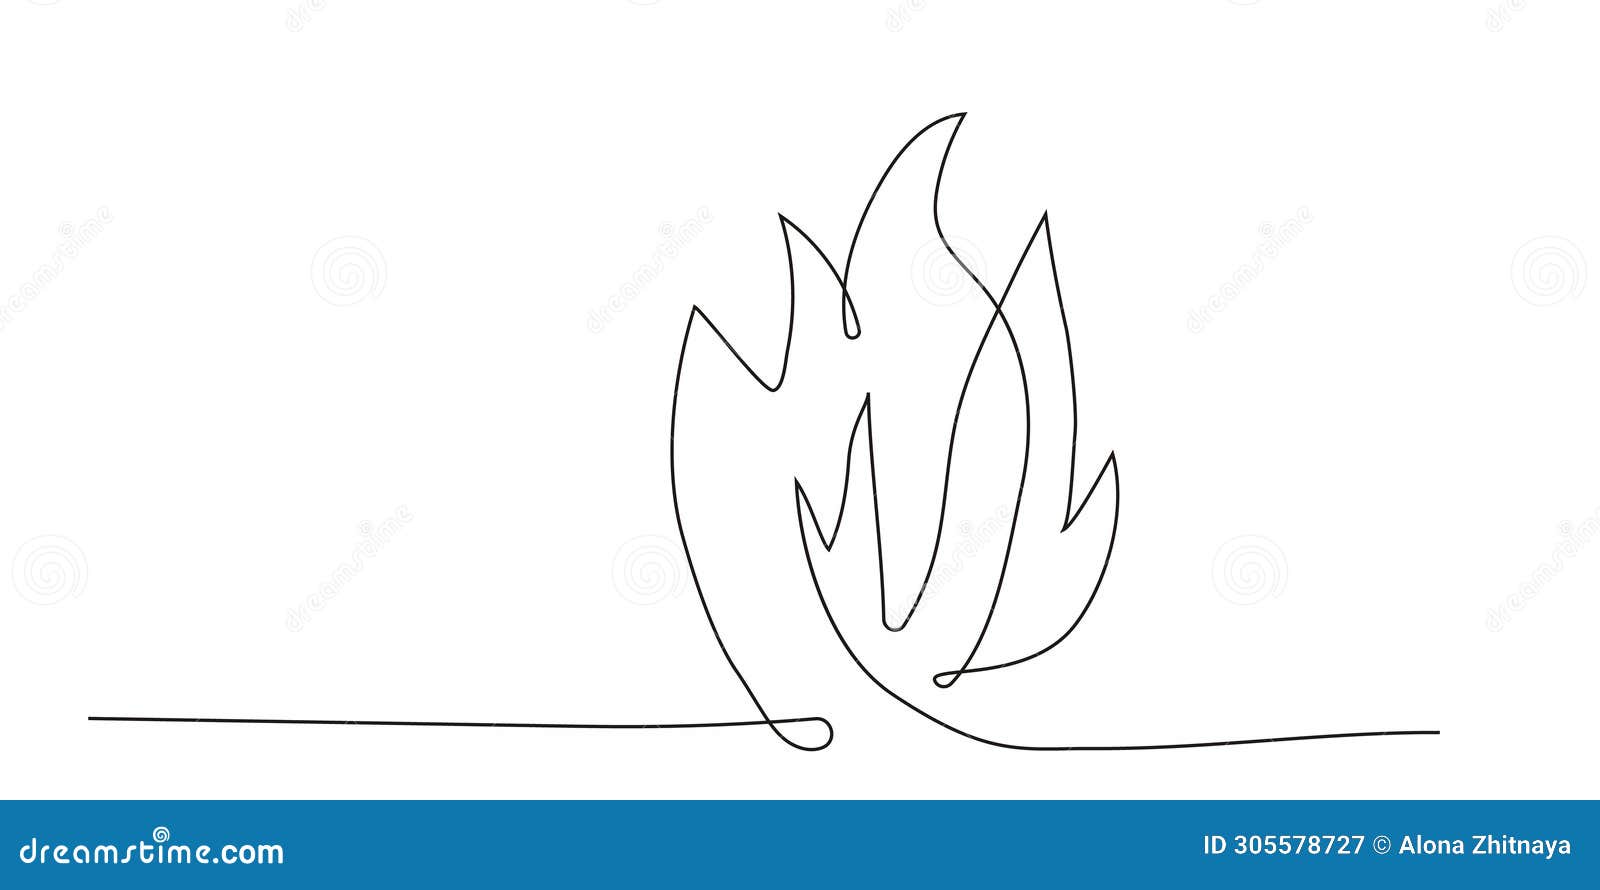 Fire Line Art Continuous, Bonfire Doodle Isolated on White Background.  Simple Burning Flame Stock Vector - Illustration of black, vector: 305578727